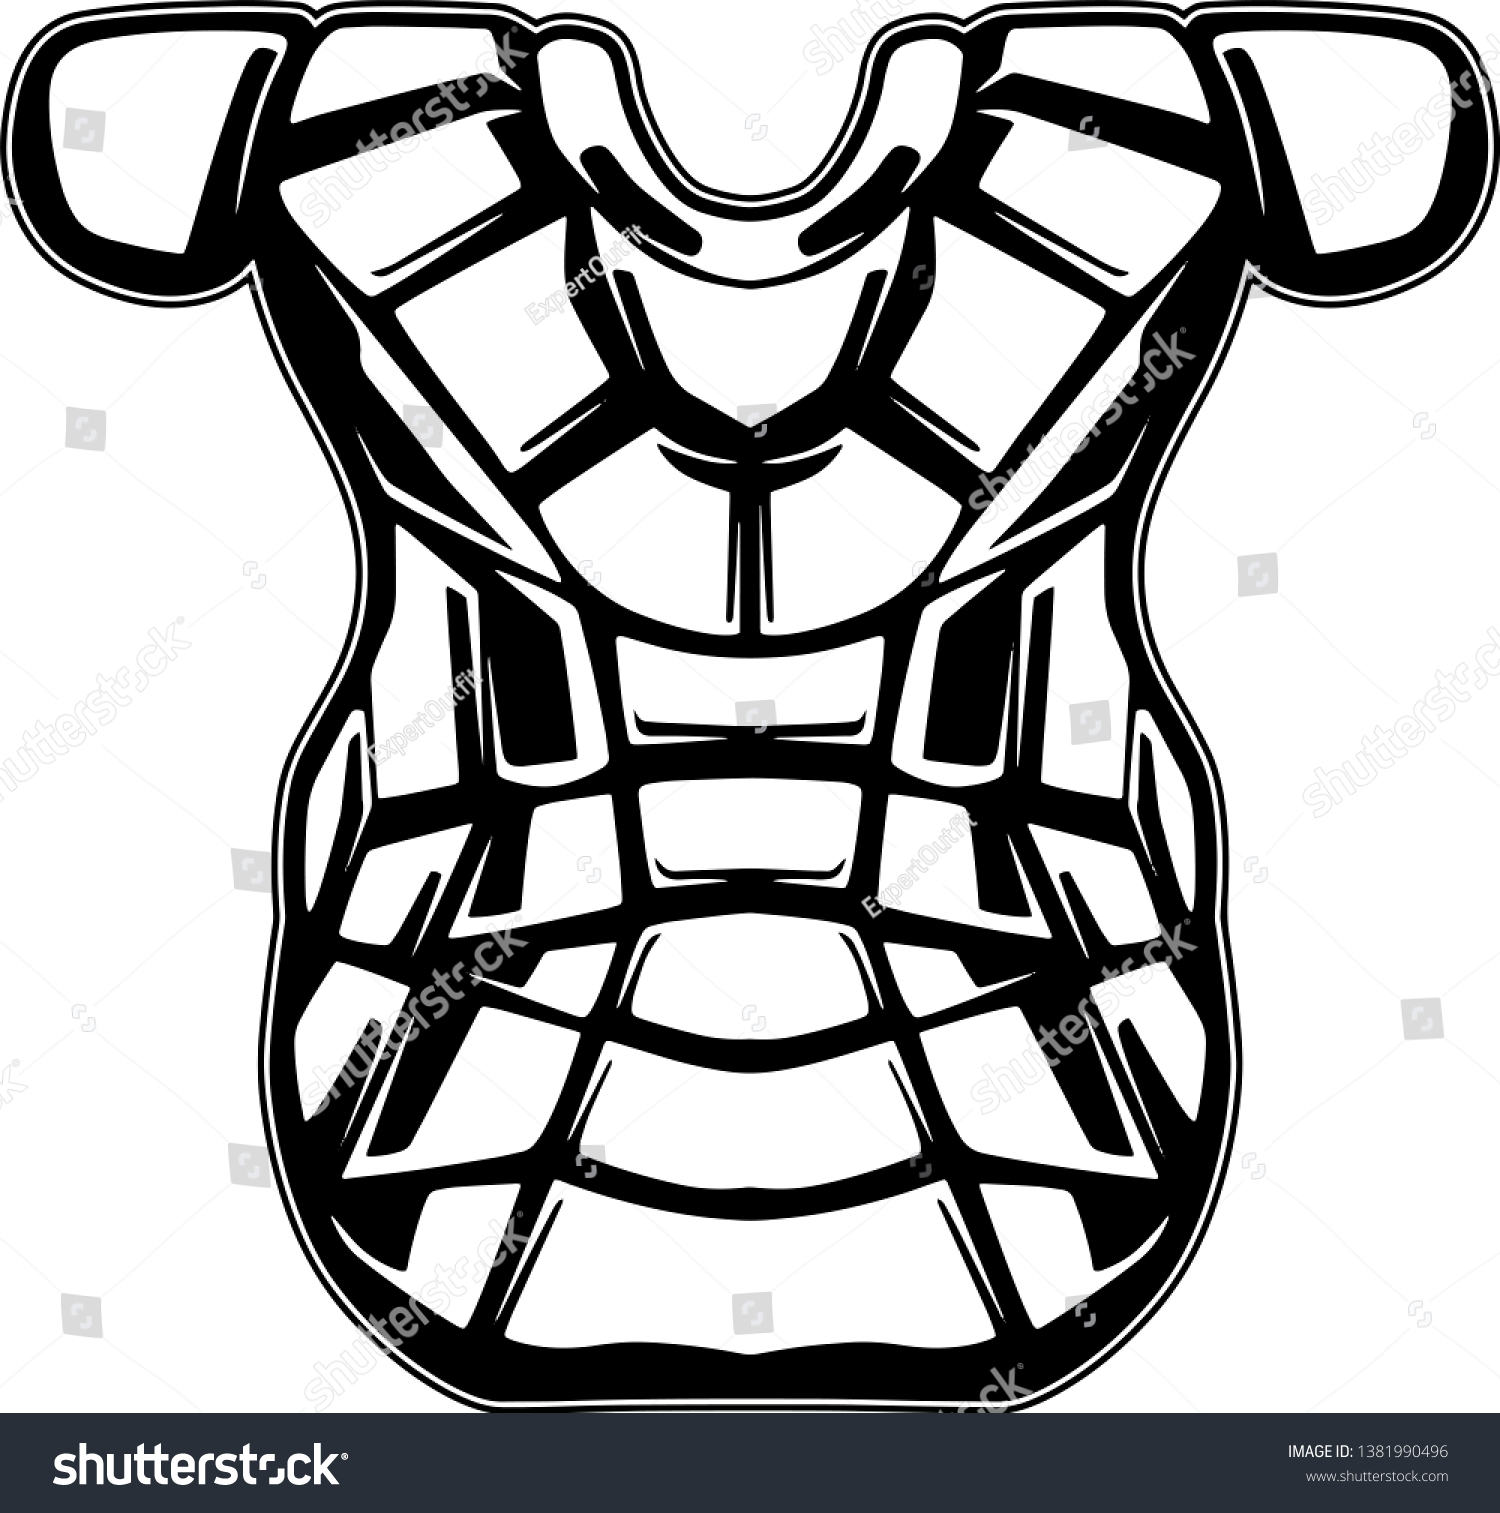 SVG of Baseball Catchers Pads With Thick Padding For Chest Protection svg